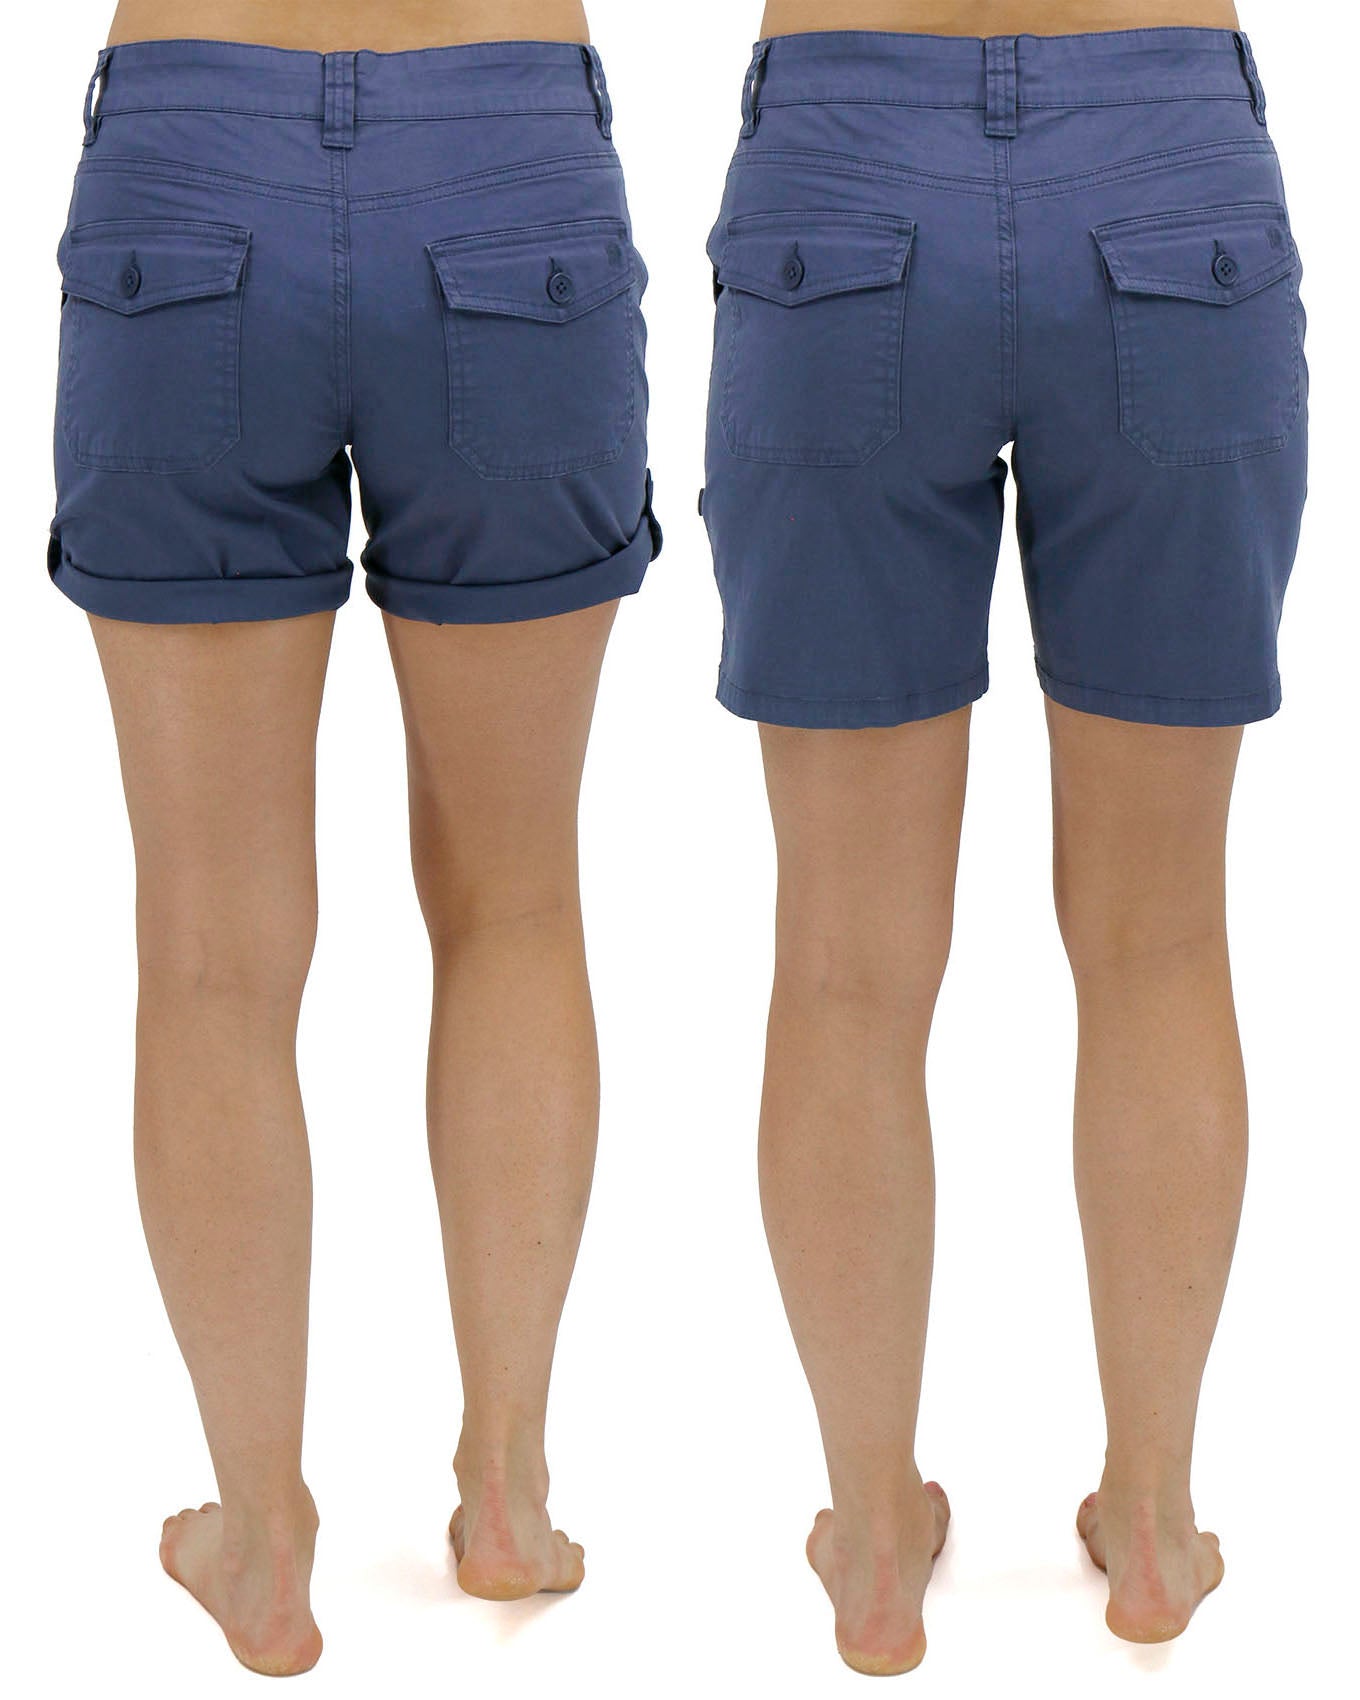 Back cuffed length comparison of Soft Navy Cargo Shorts